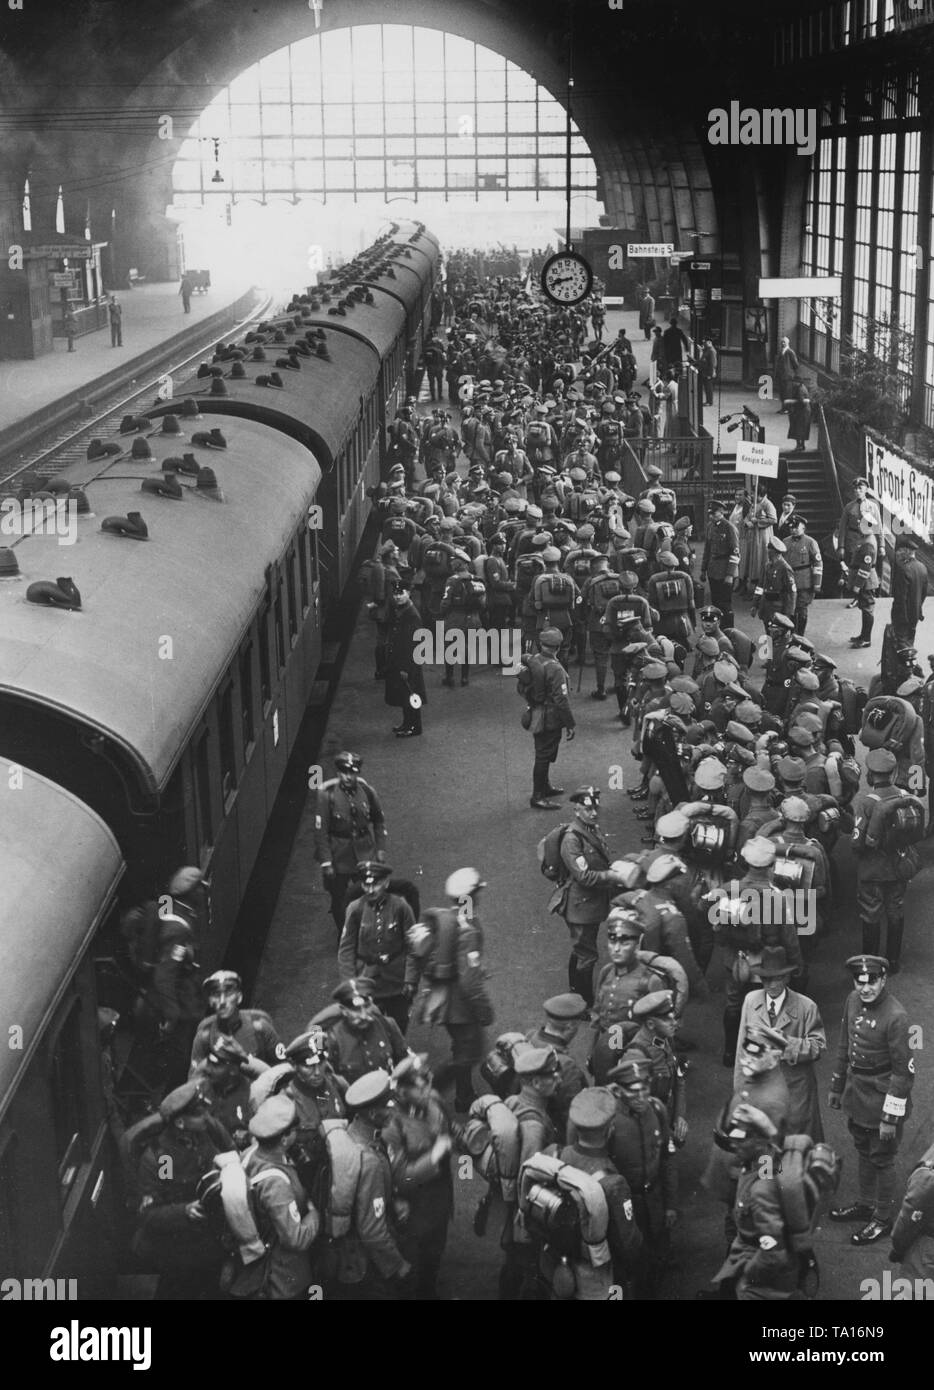 On the occasion of the Reich leadership meeting of the Stahlhelm, a special train with participants from the Ostmarkt and Brandenburg arrives at the Hannover Hauptbahnhof. On the right, a woman carries a shield for the 'Bund Koenigin Luise' (Women's Organization of the Stahlhelm). On the right, there is a banner with the inscription 'Front heil!' to be seen. Stock Photo